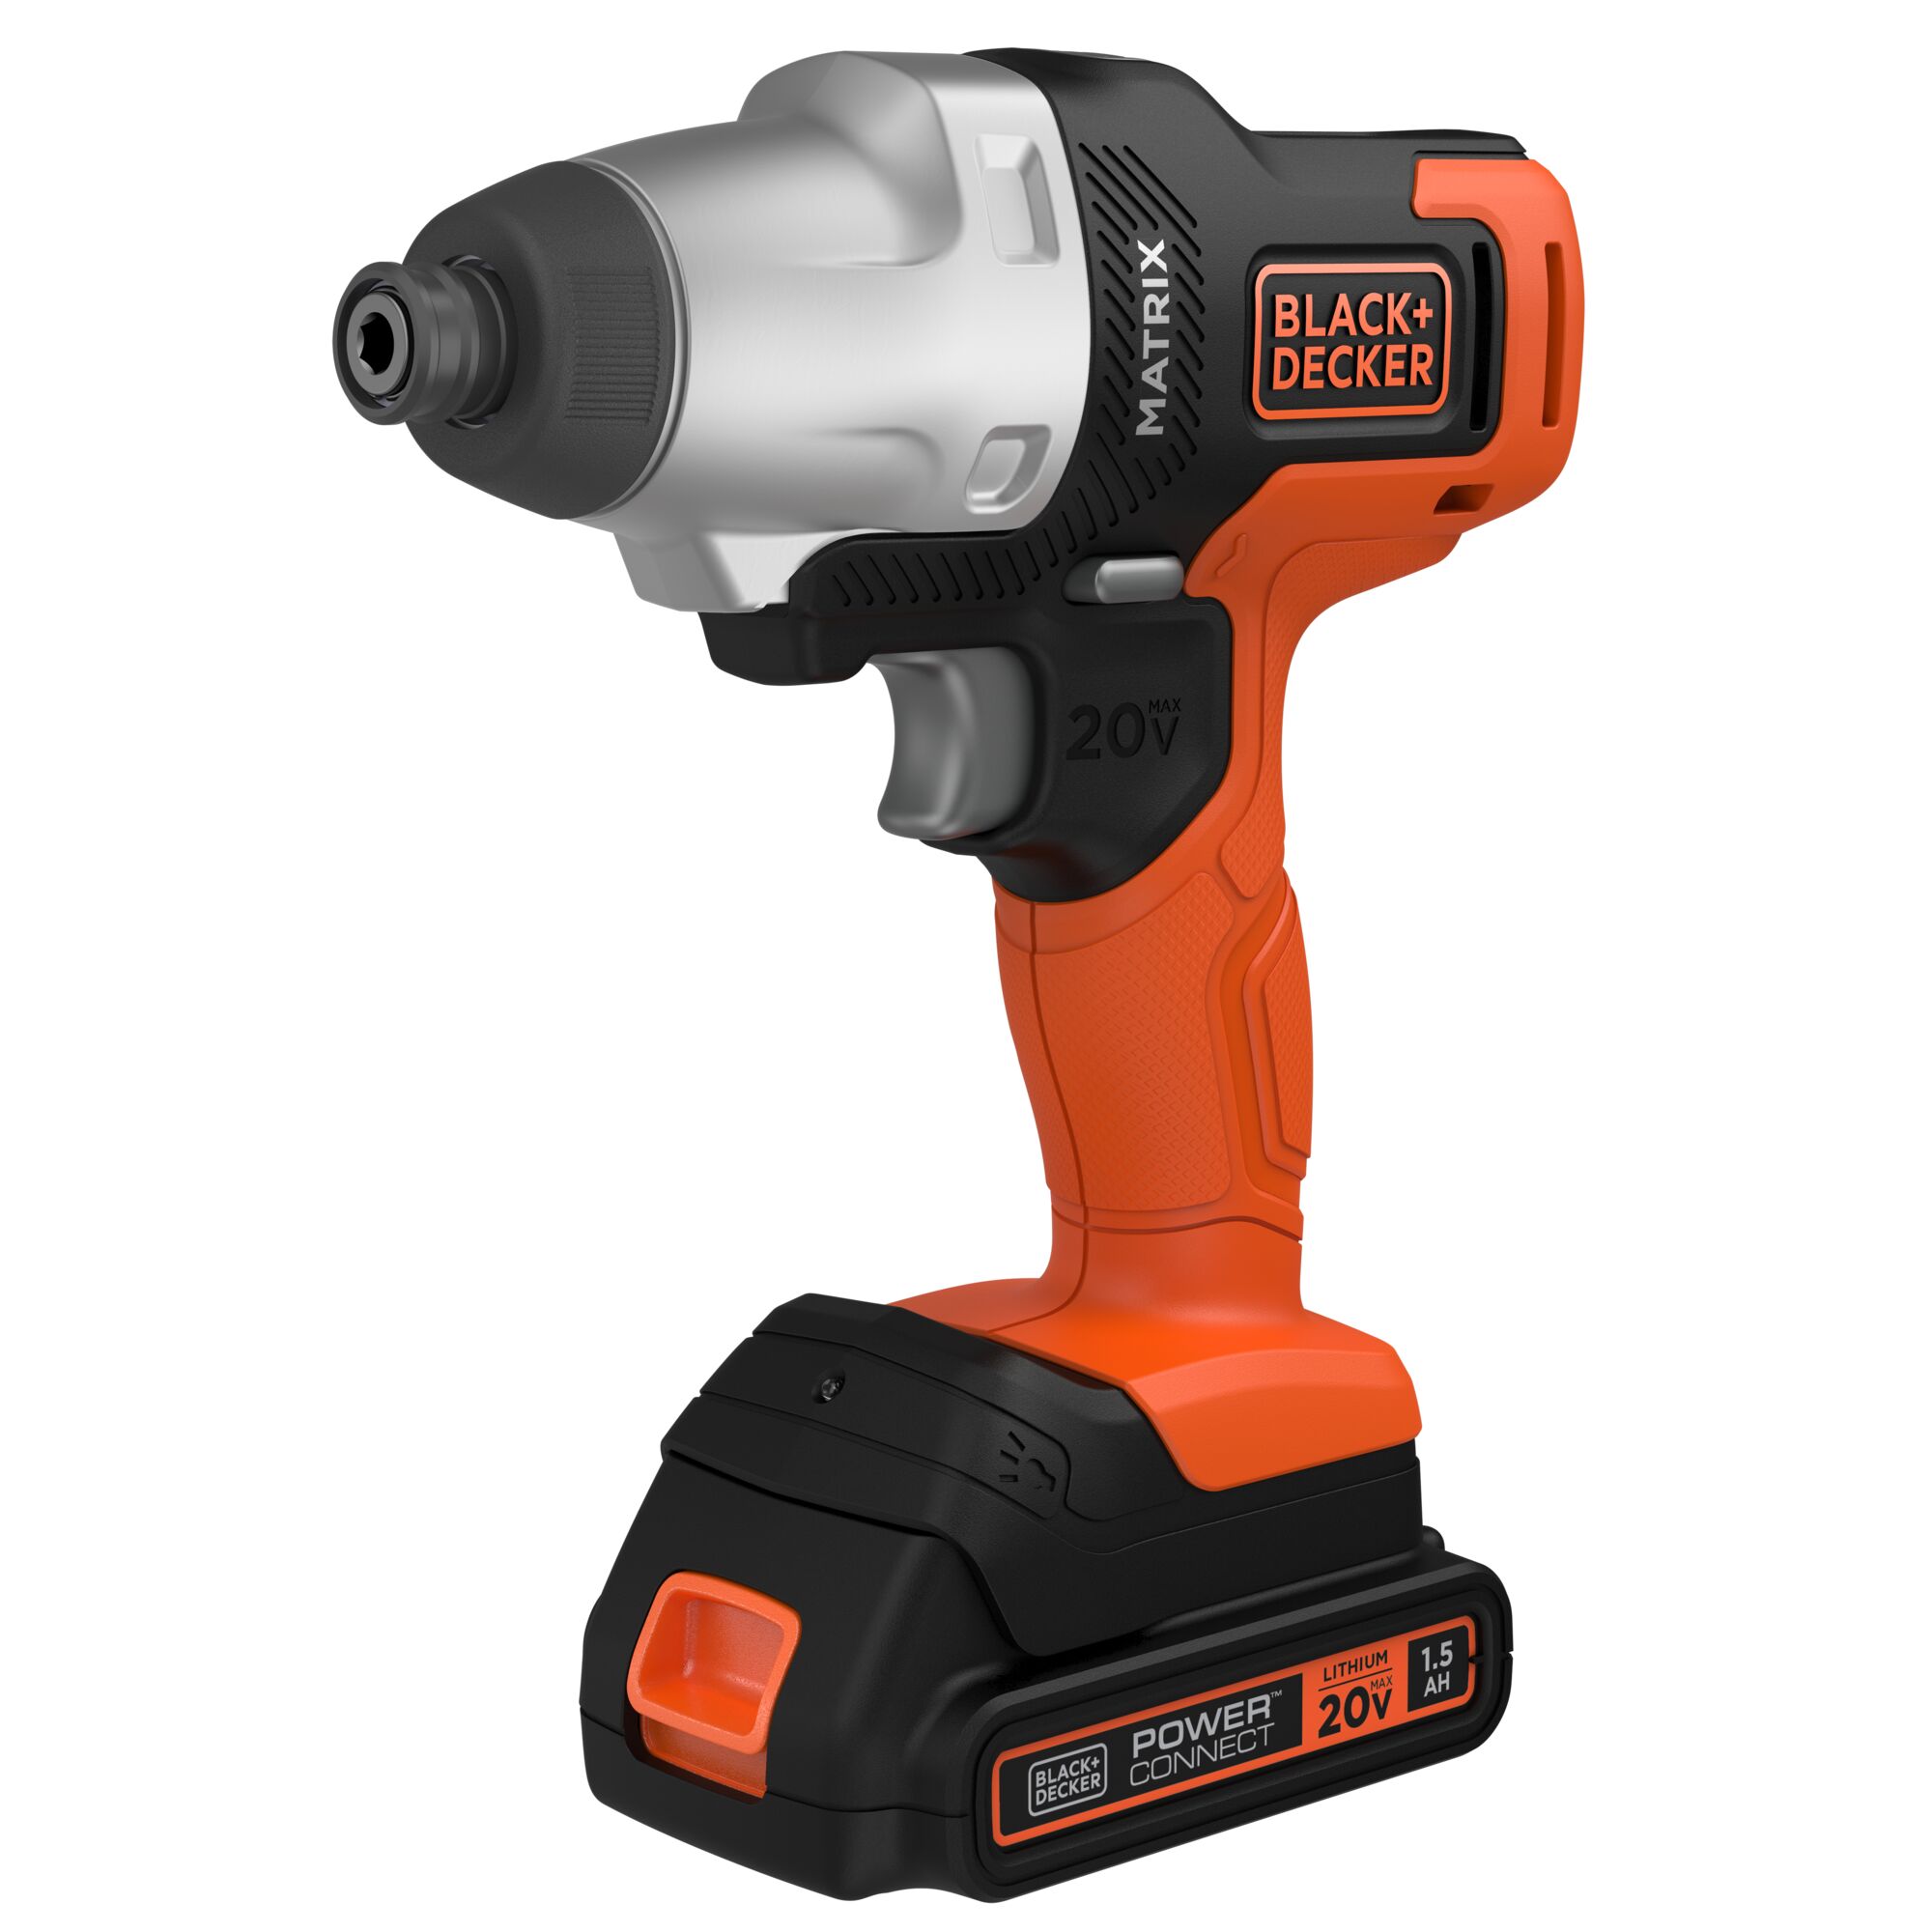 Variable speed feature of MATRIX Impact Driver Attachment.